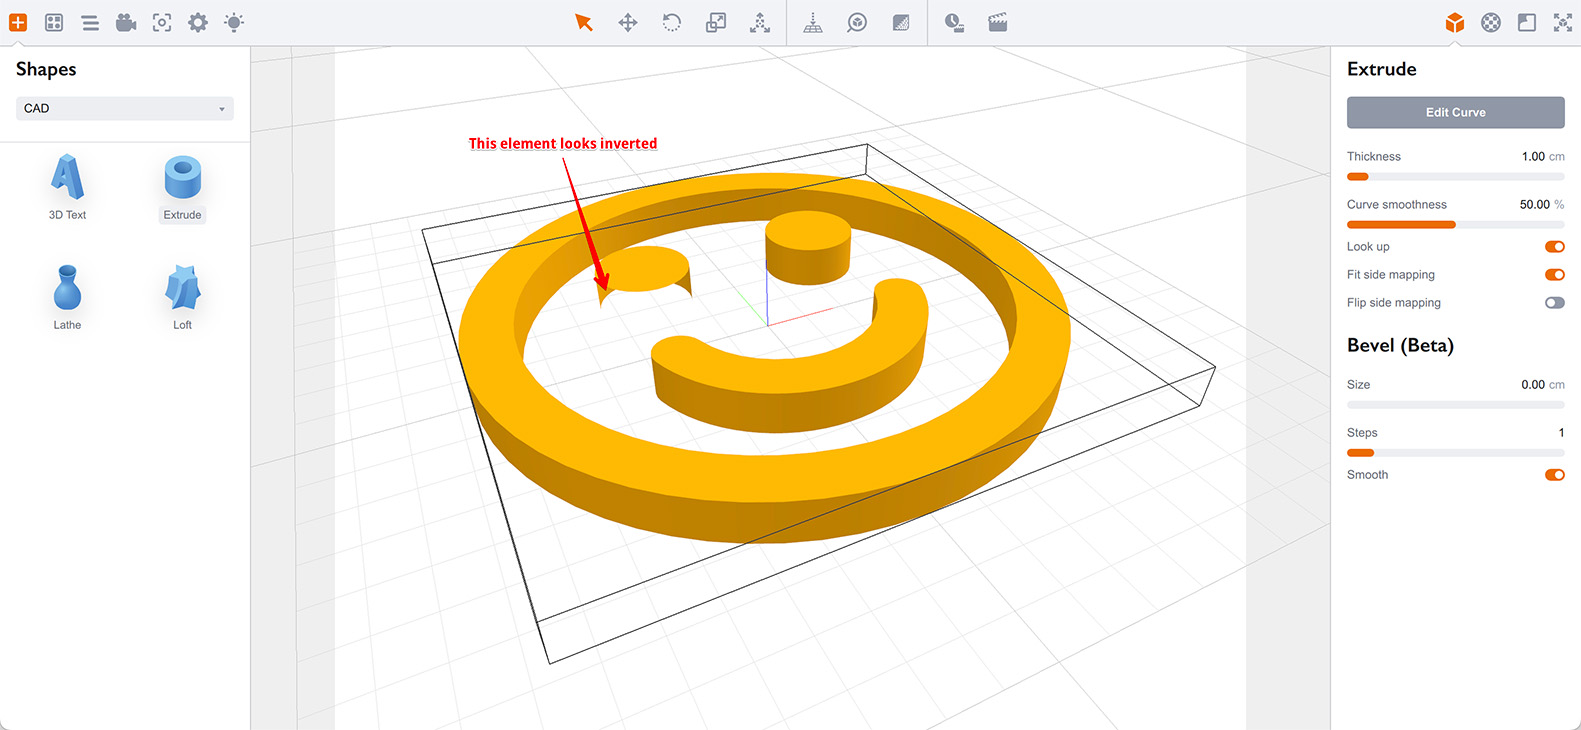 Extruded shape looks inverted because of the wrong curve direction